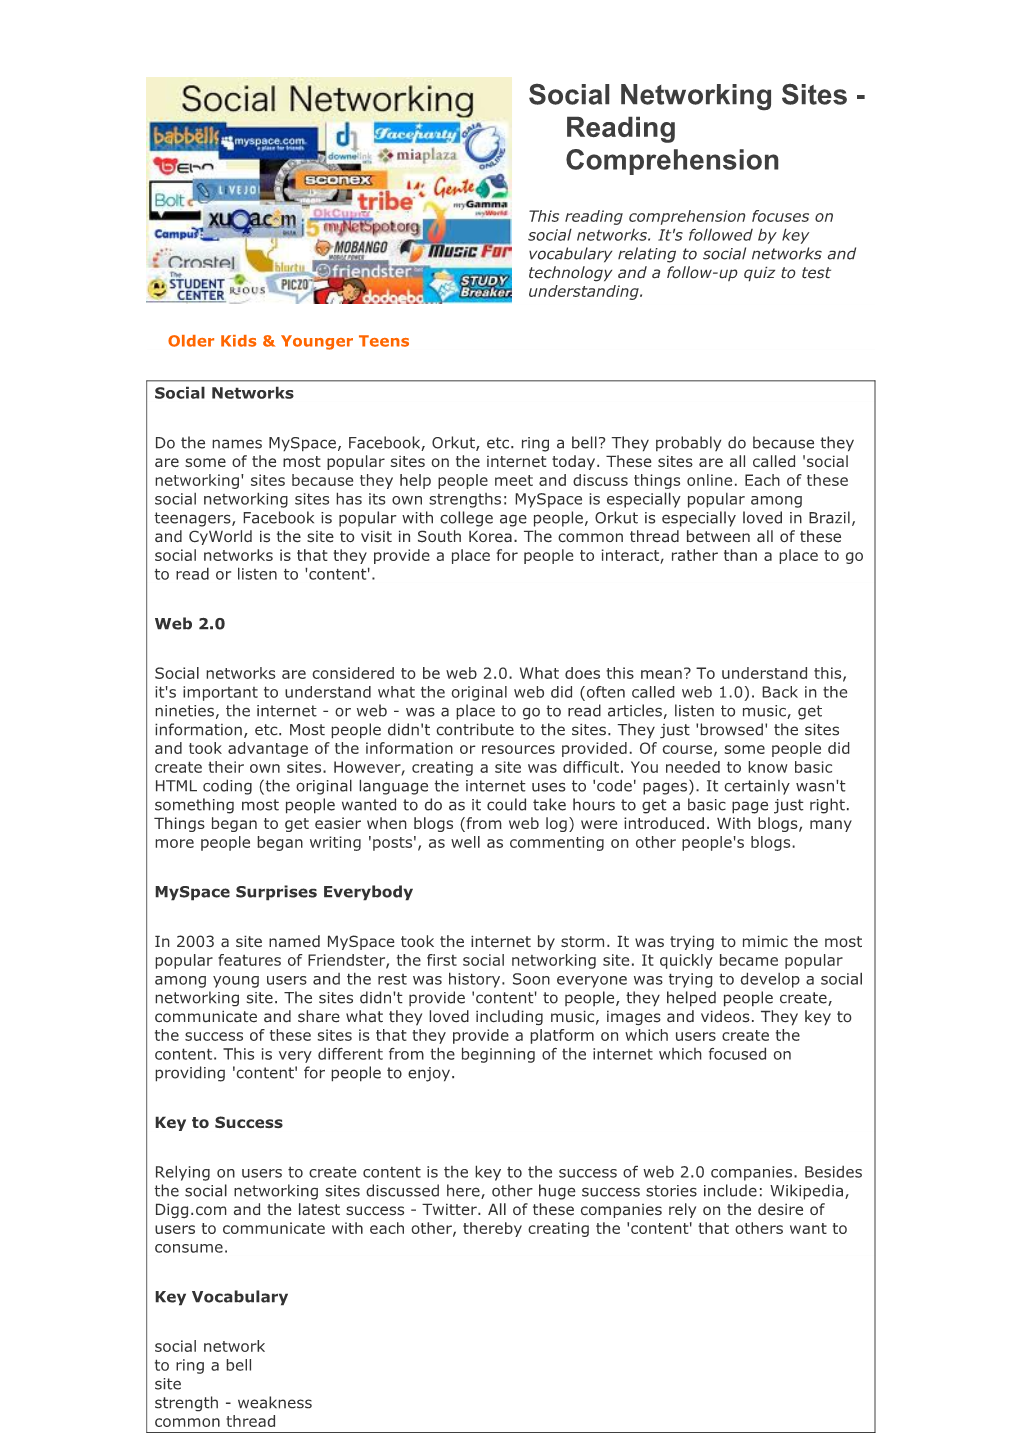 Social Networking Sites - Reading Comprehension